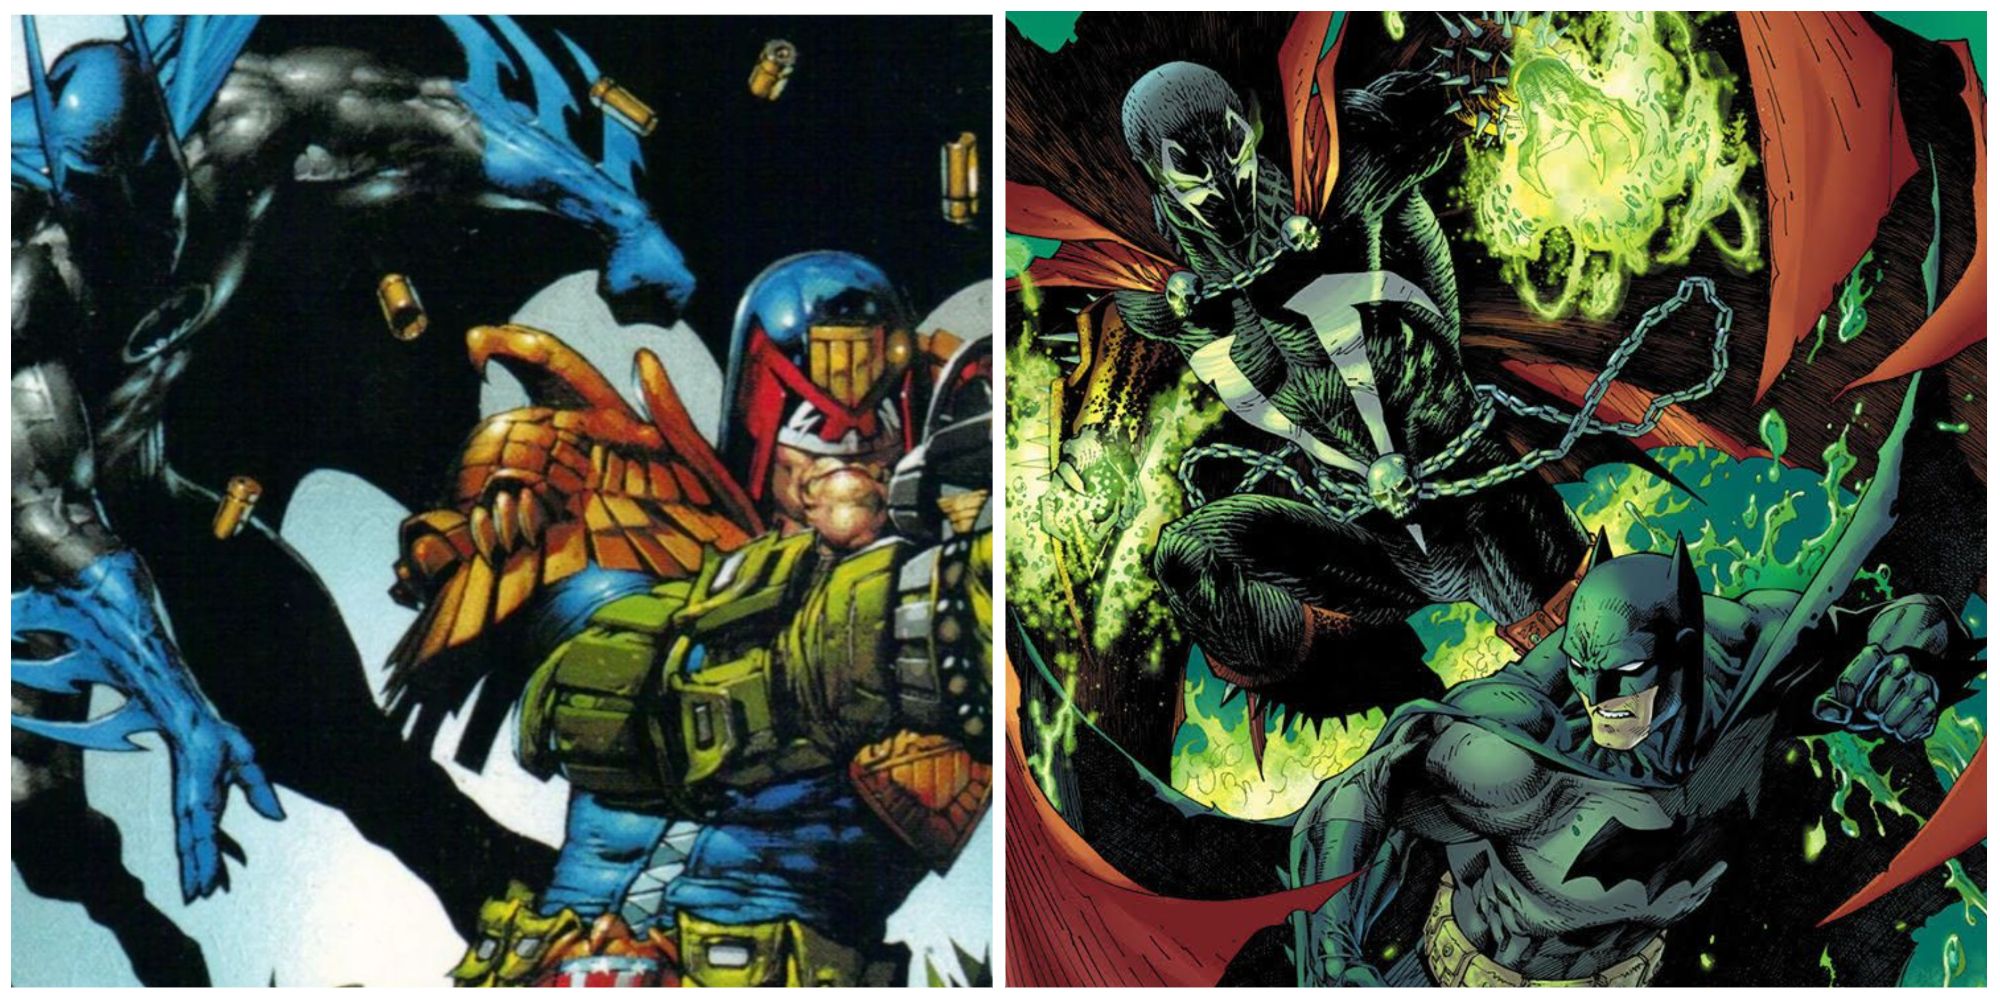 A split image of Batman sneaking up on Judge Dredd and of Spawn appearing behind Batman